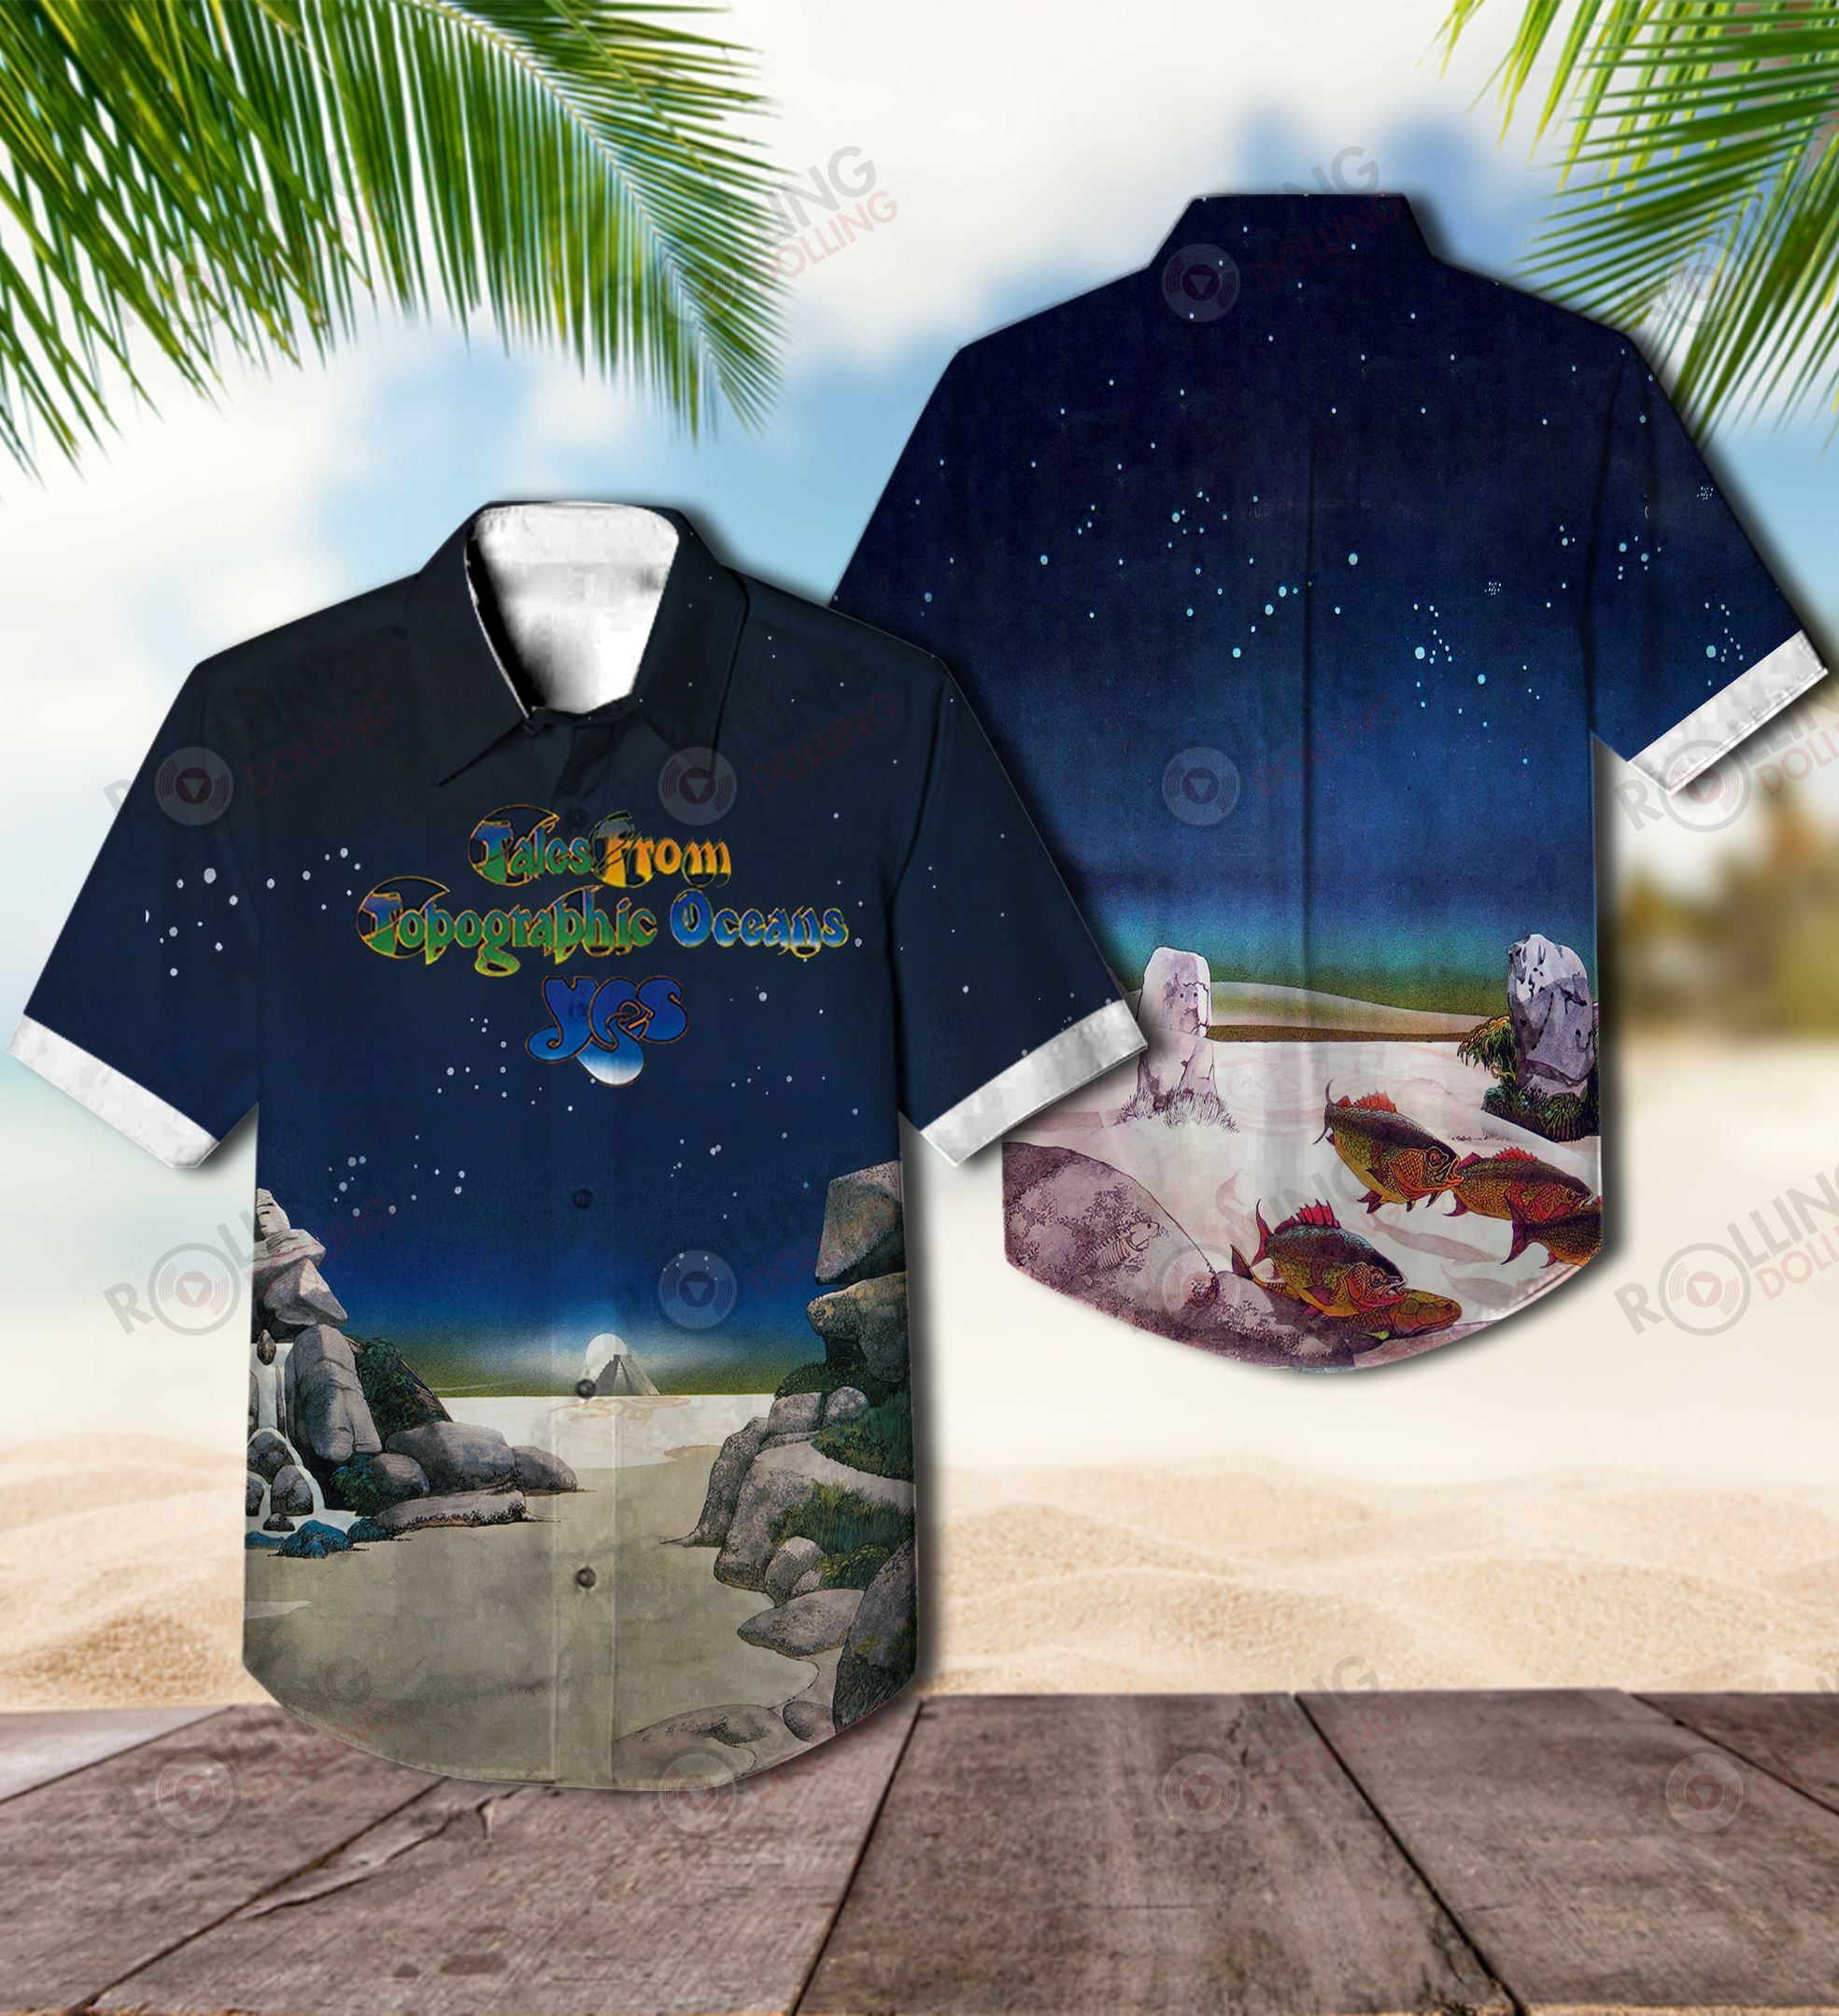 The Hawaiian Shirt is a popular shirt that is worn by Rock band fans 56